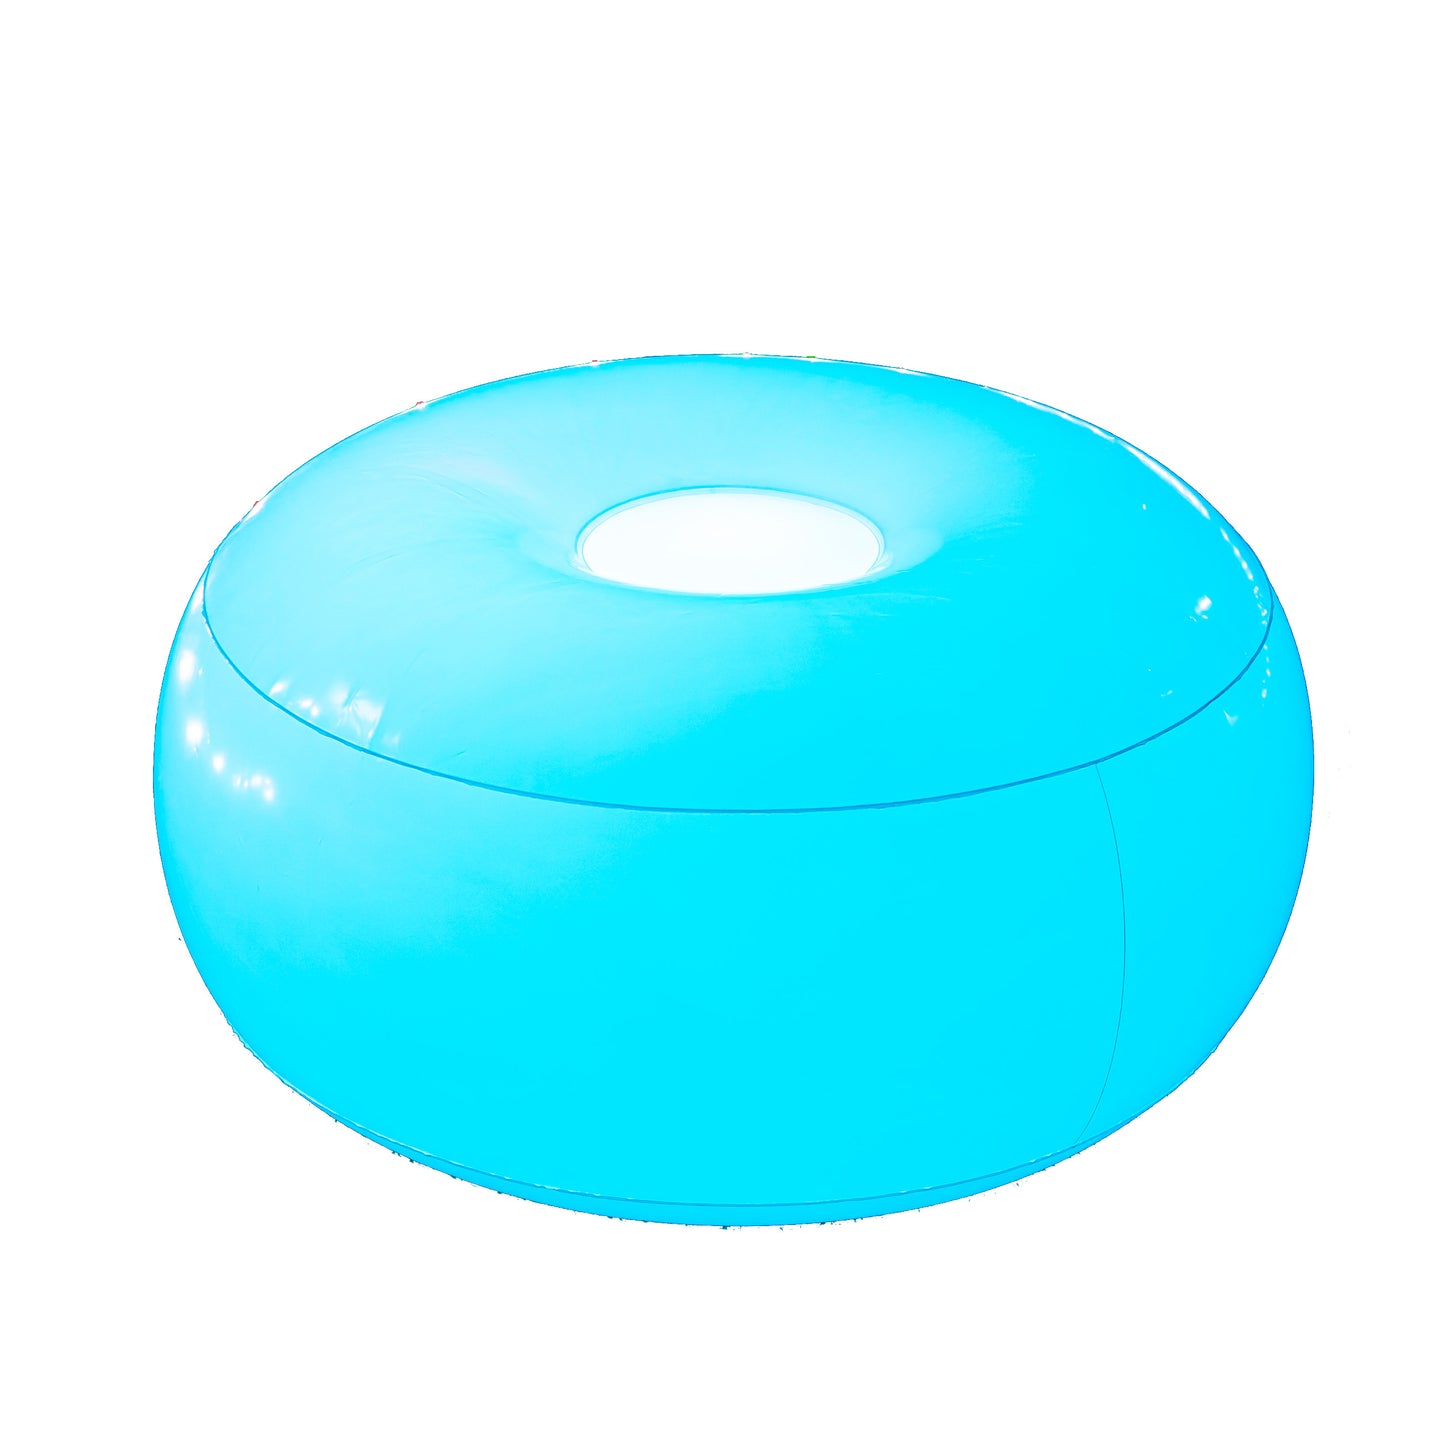 Inflatable Ottoman Illuminated LED 23 Inch AirCandy